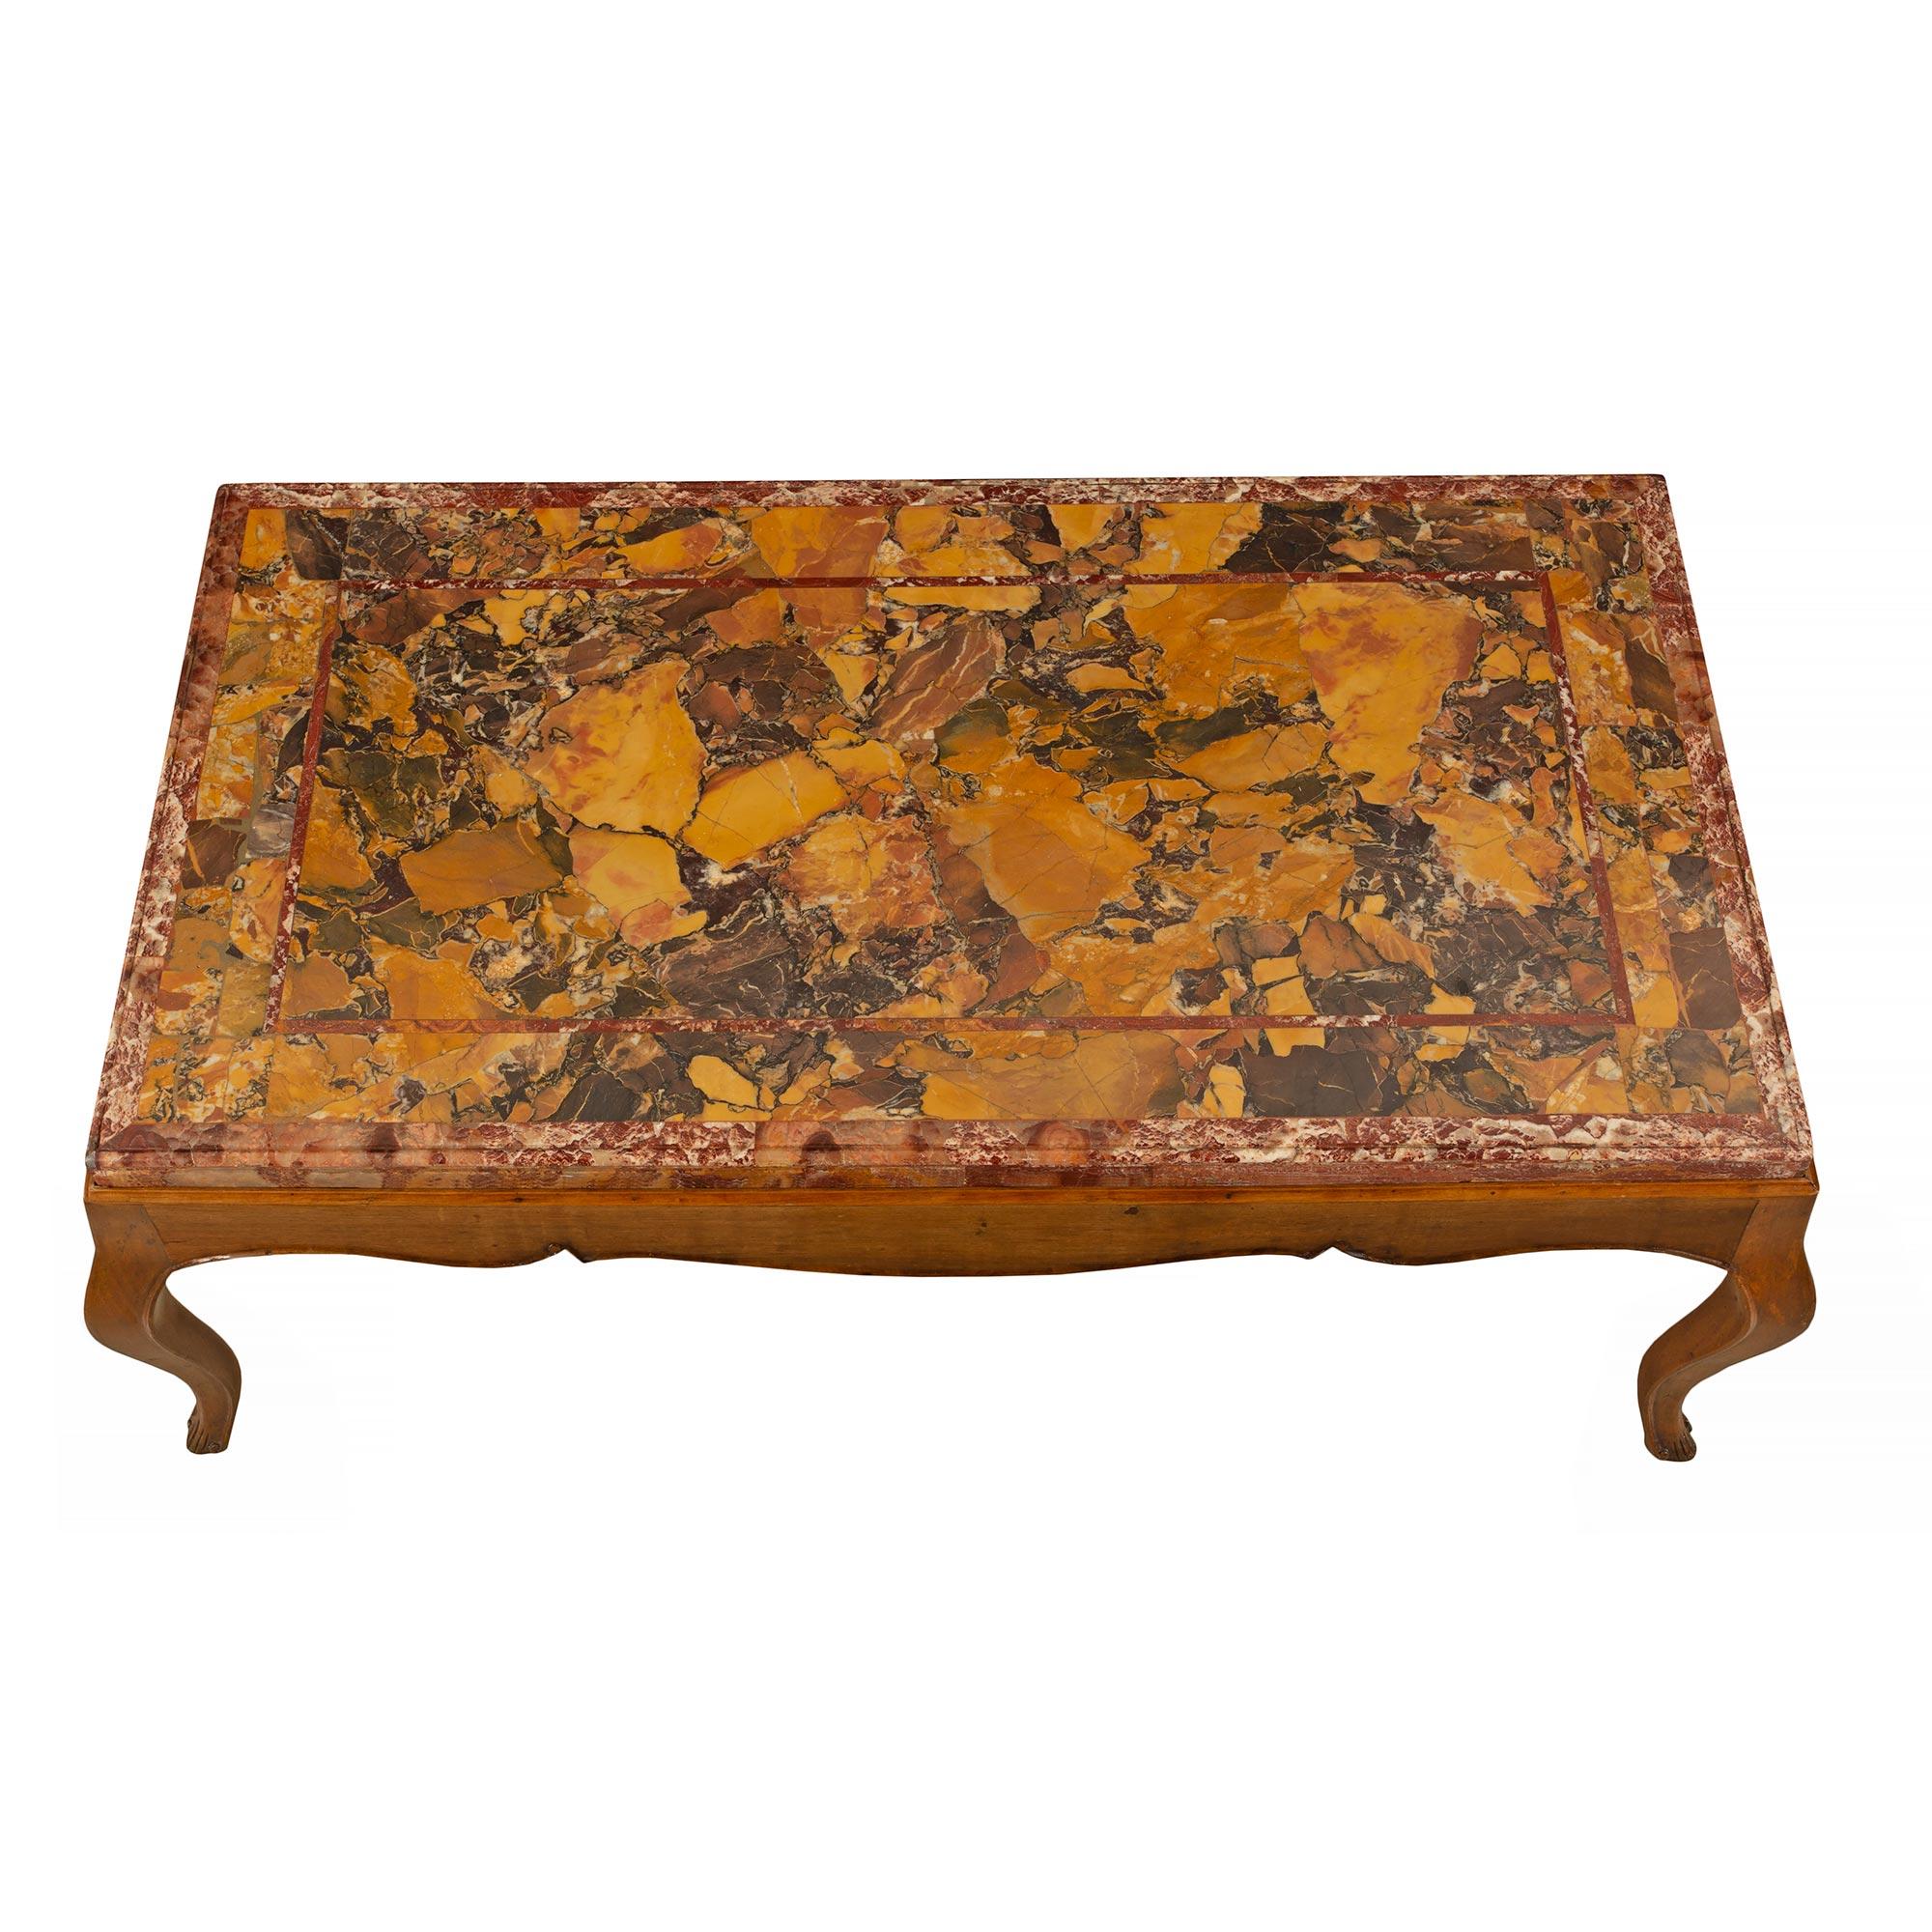 Italian 19th Century Louis XV Style Walnut and Marble Coffee Table In Good Condition For Sale In West Palm Beach, FL